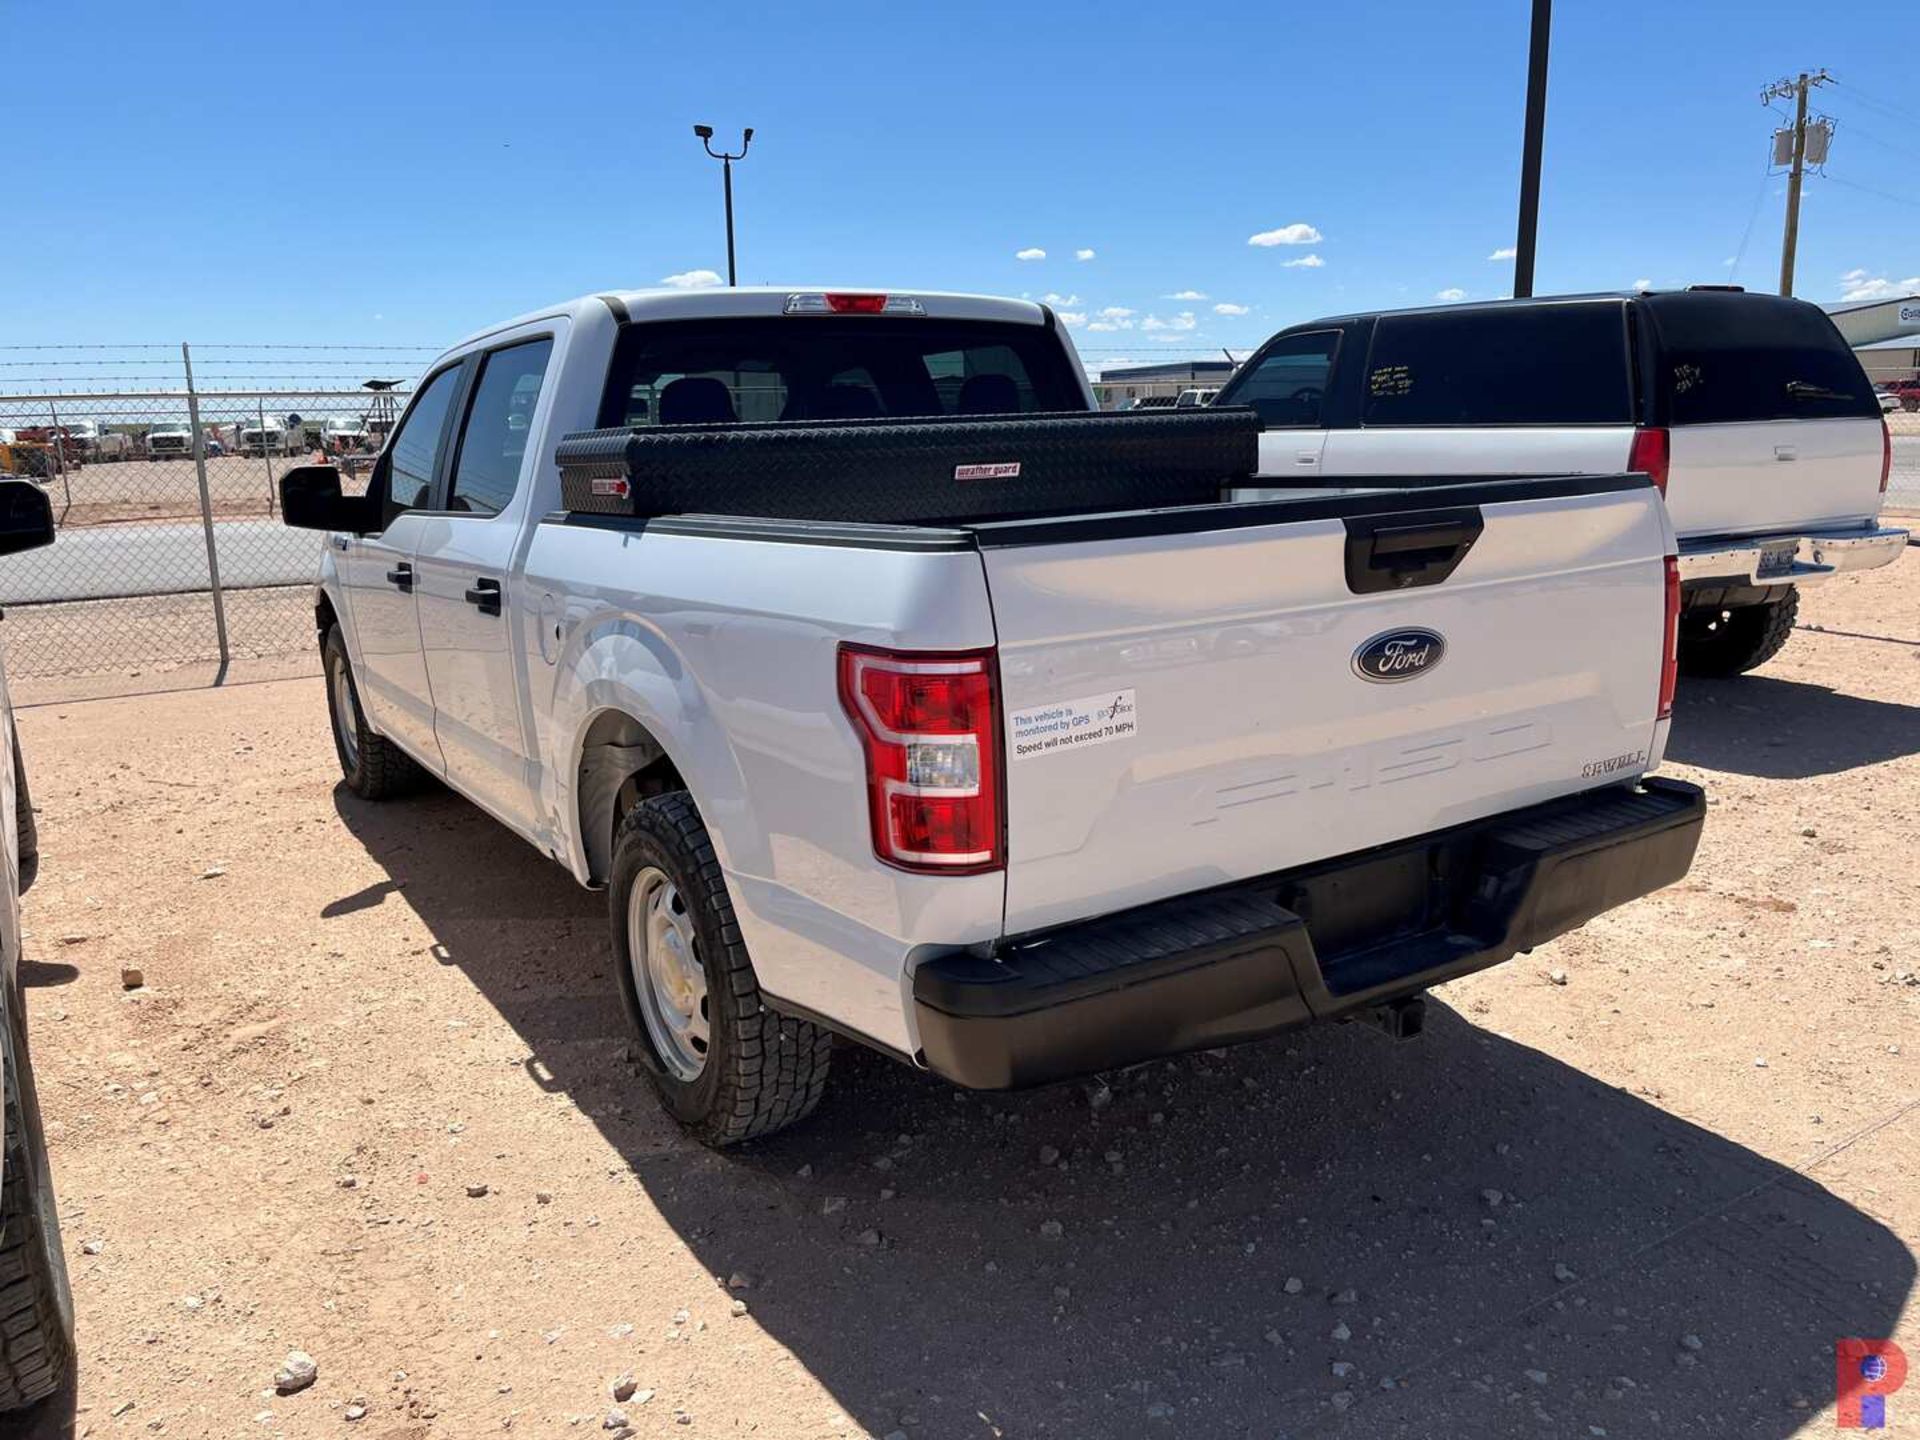 2019 FORD F-150 CREW CAB PICKUP TRUCK - Image 7 of 12